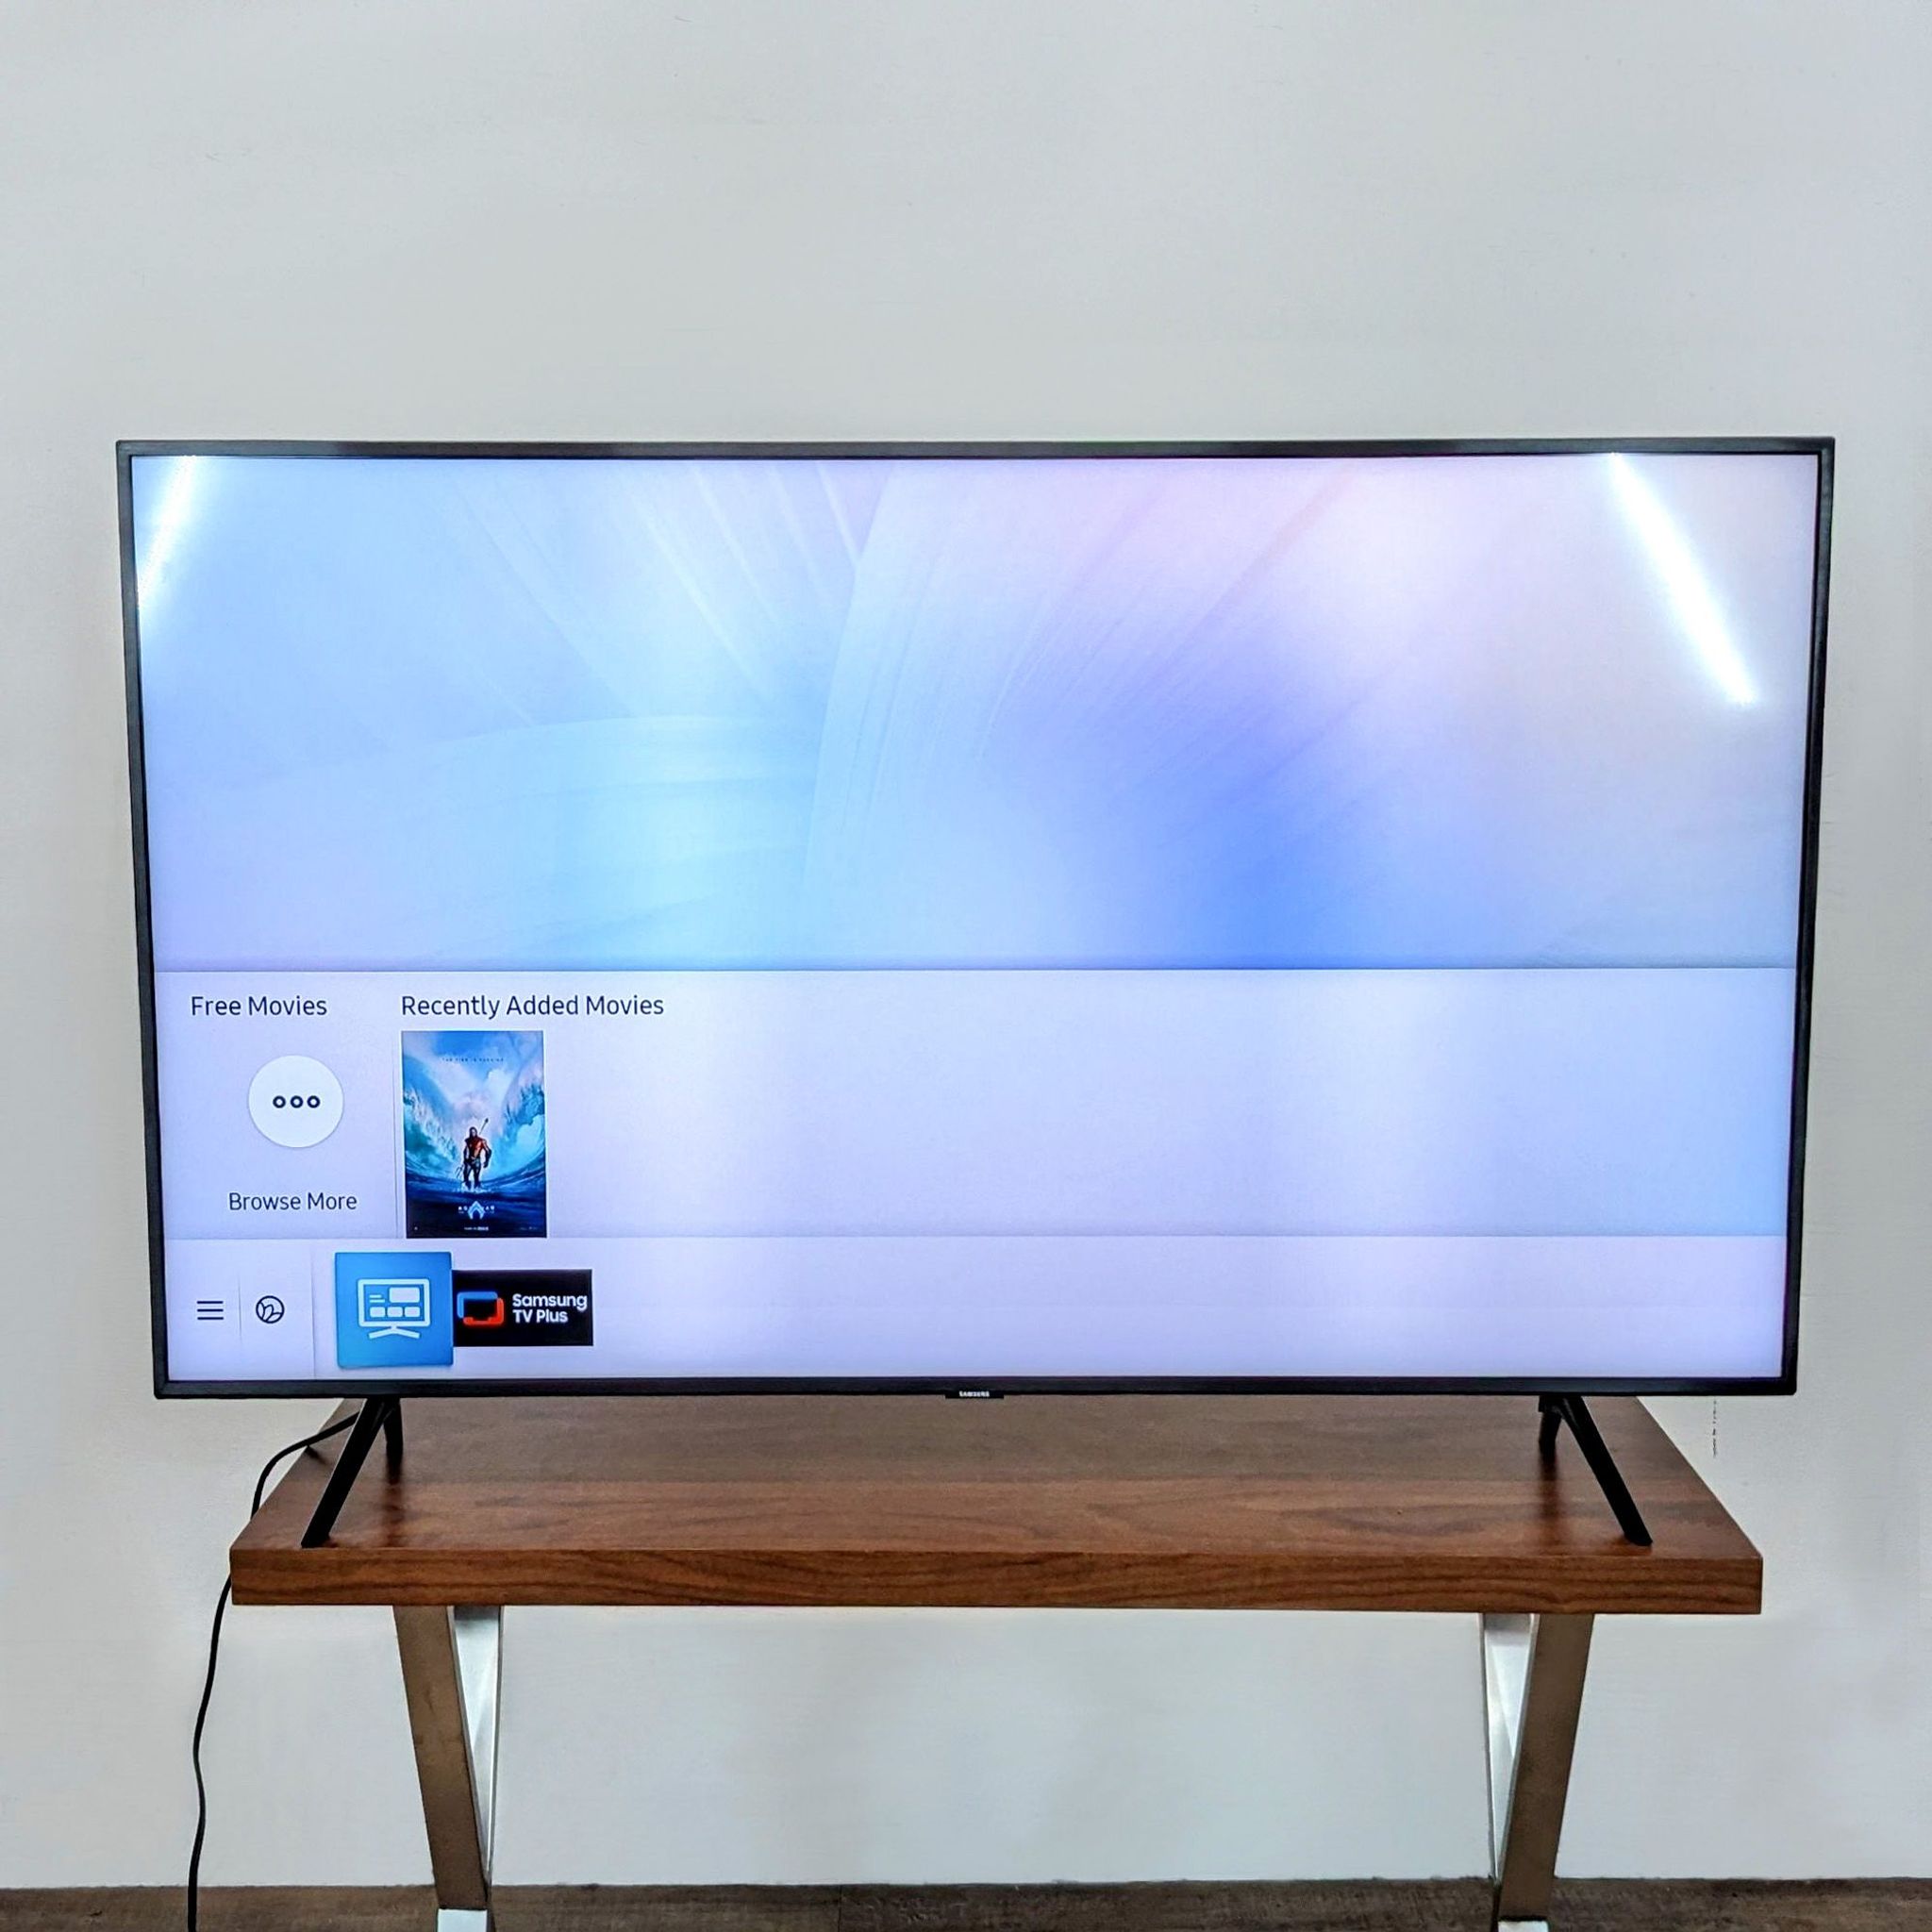 Side view of a Samsung flat-screen TV showing its slim profile and stand on a wooden table.